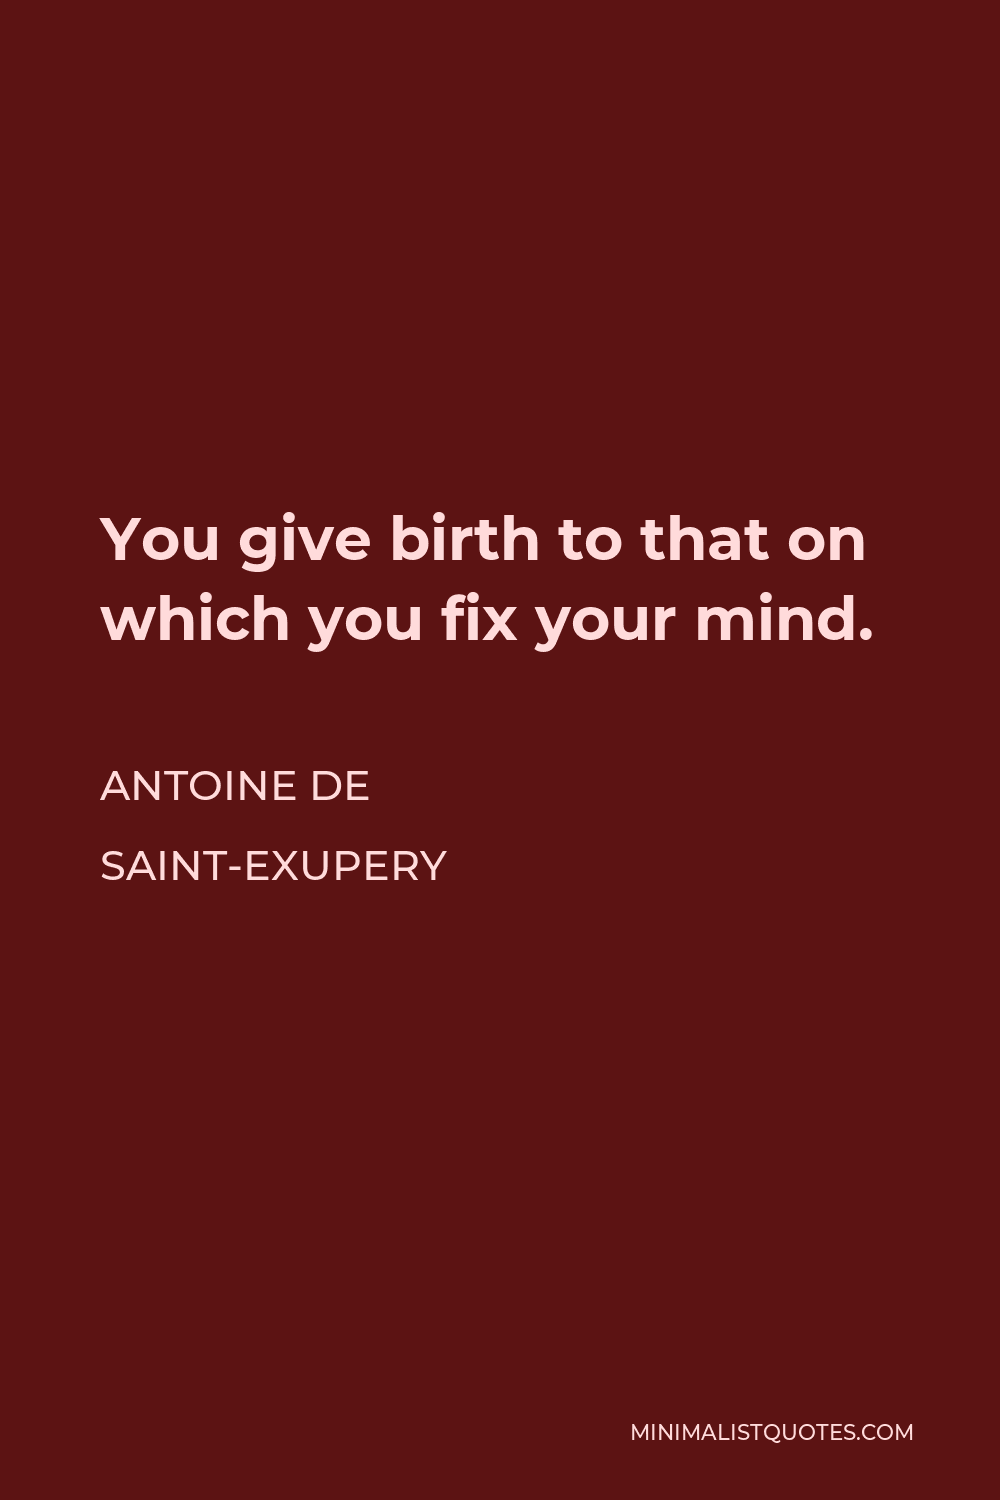 Antoine de Saint-Exupery Quote - You give birth to that on which you fix your mind.